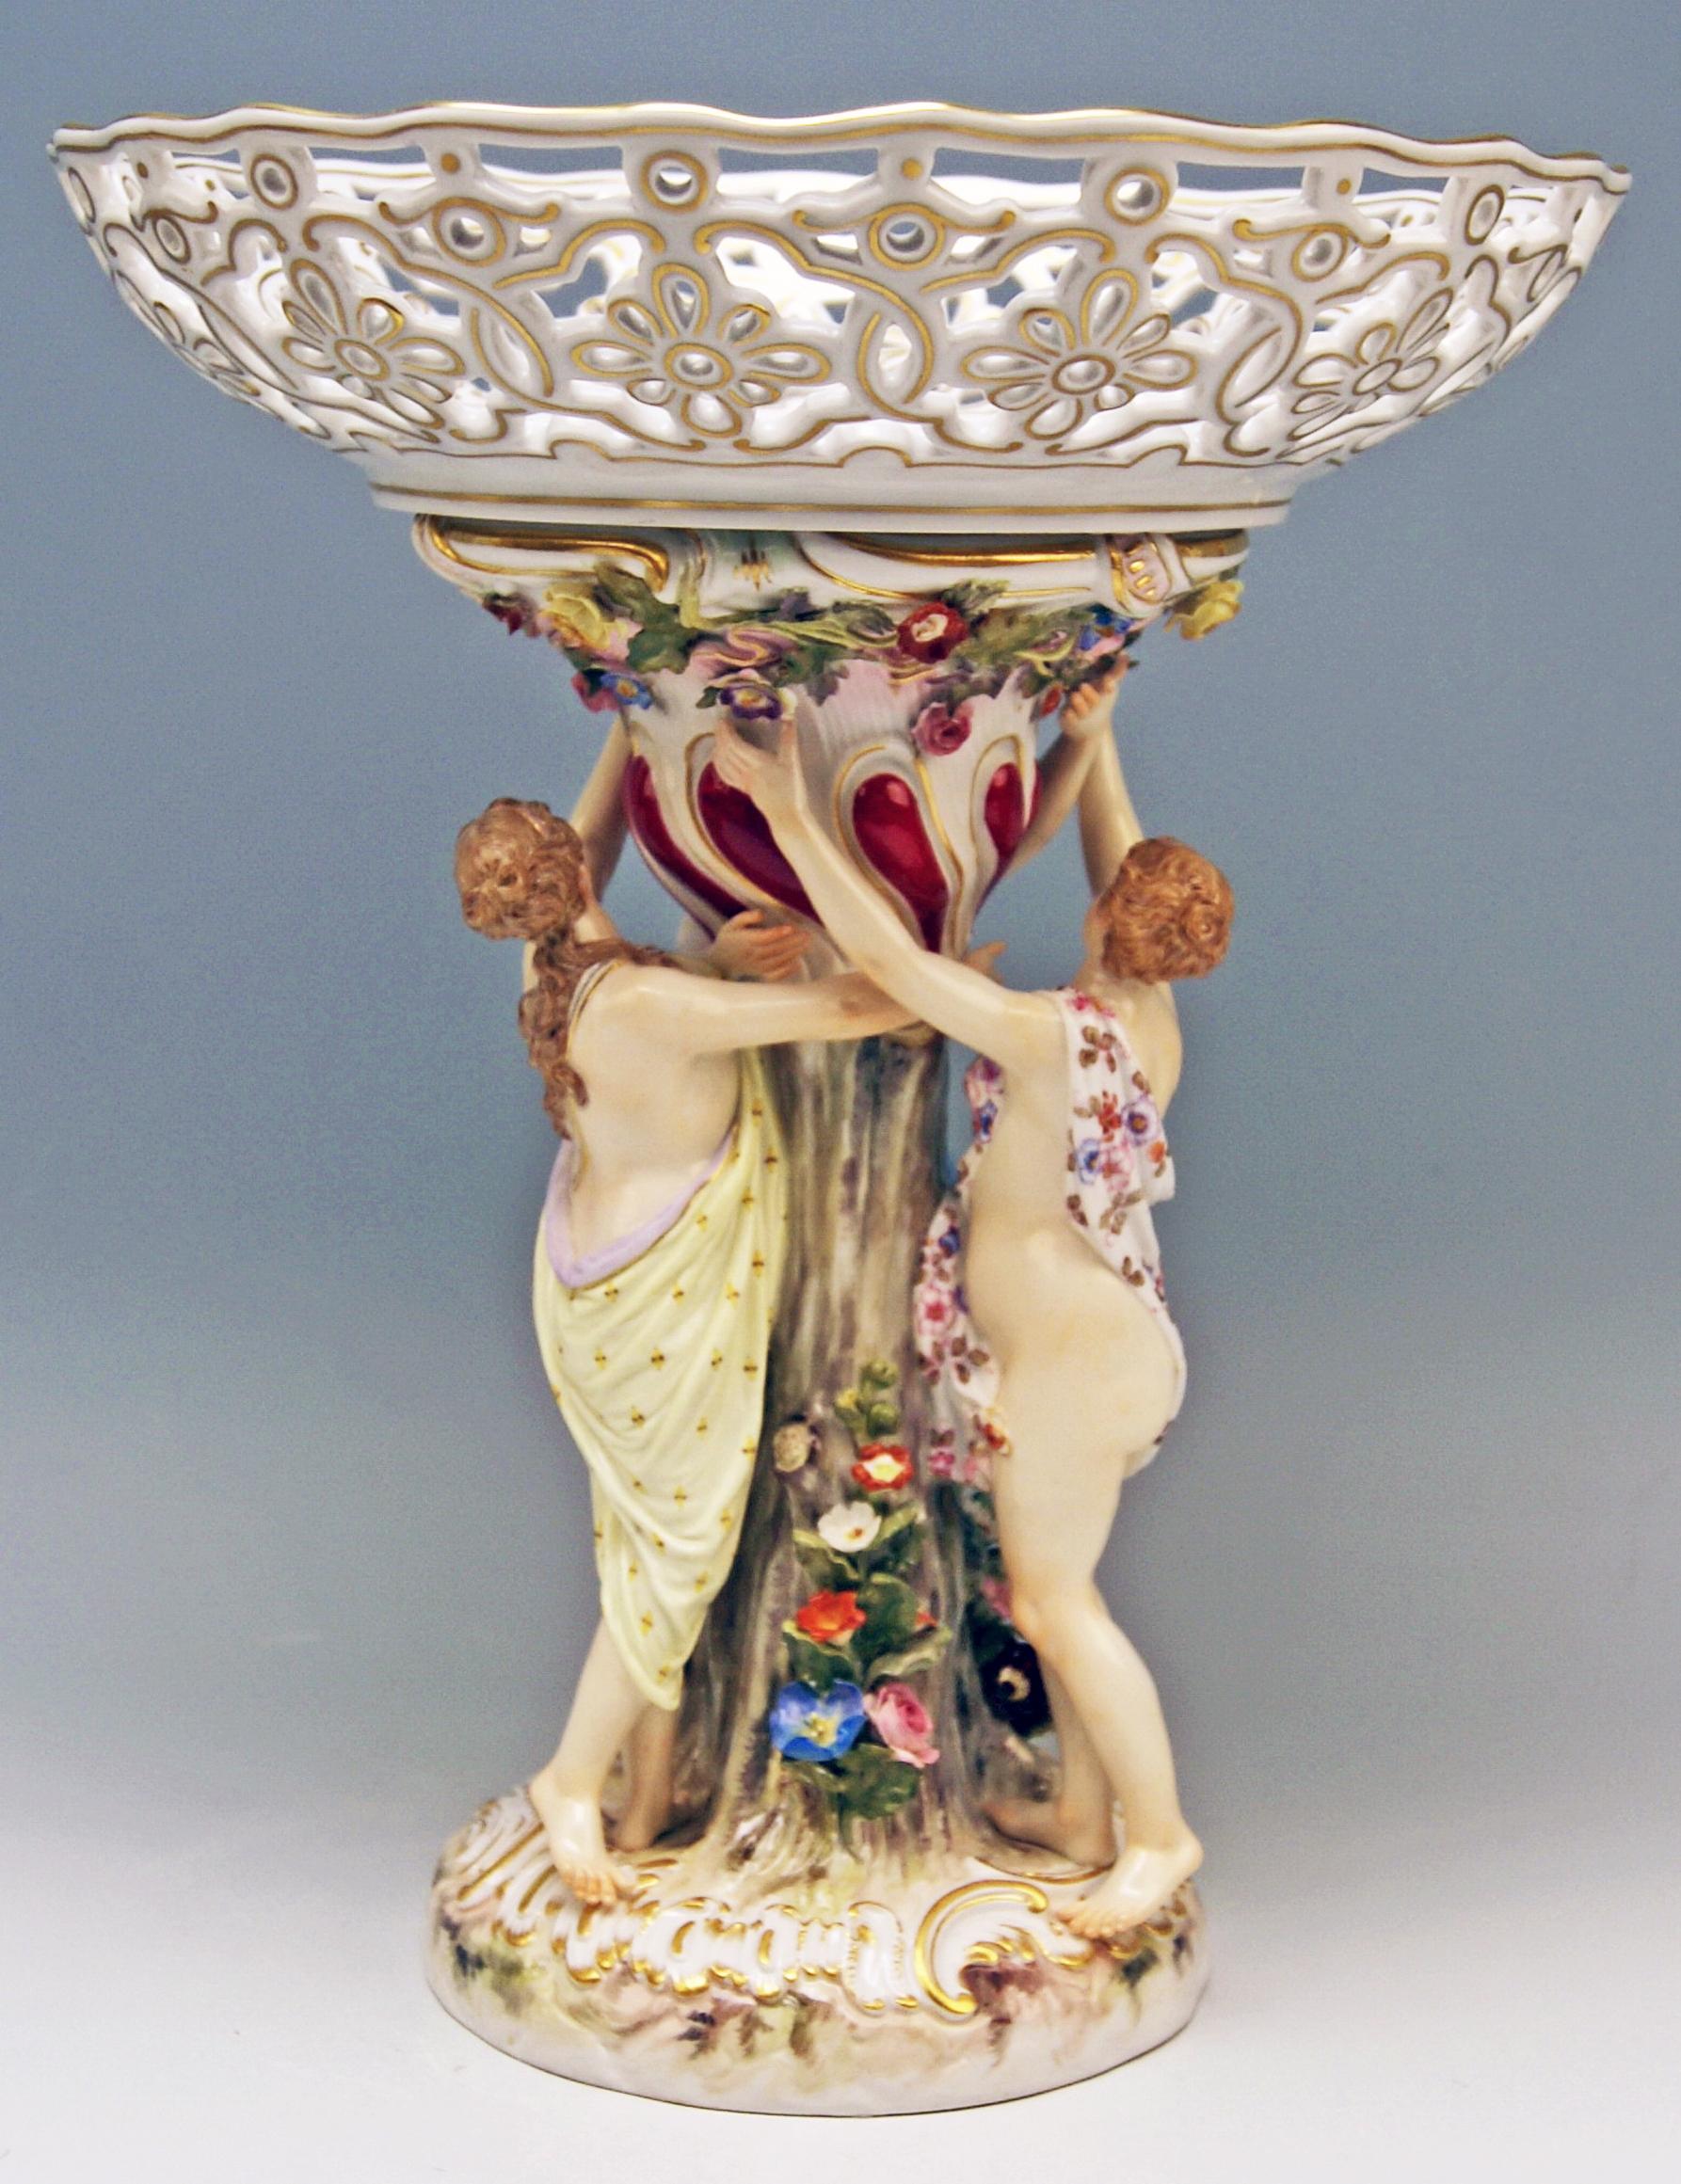 This Meissen centrepiece is manufactured in most skillful manner, having a stalk with female figurines symbolizing the Three Charities:
There is a round reticulated bowl with golden paintings existing / the bowl is attached to an excellent stalk